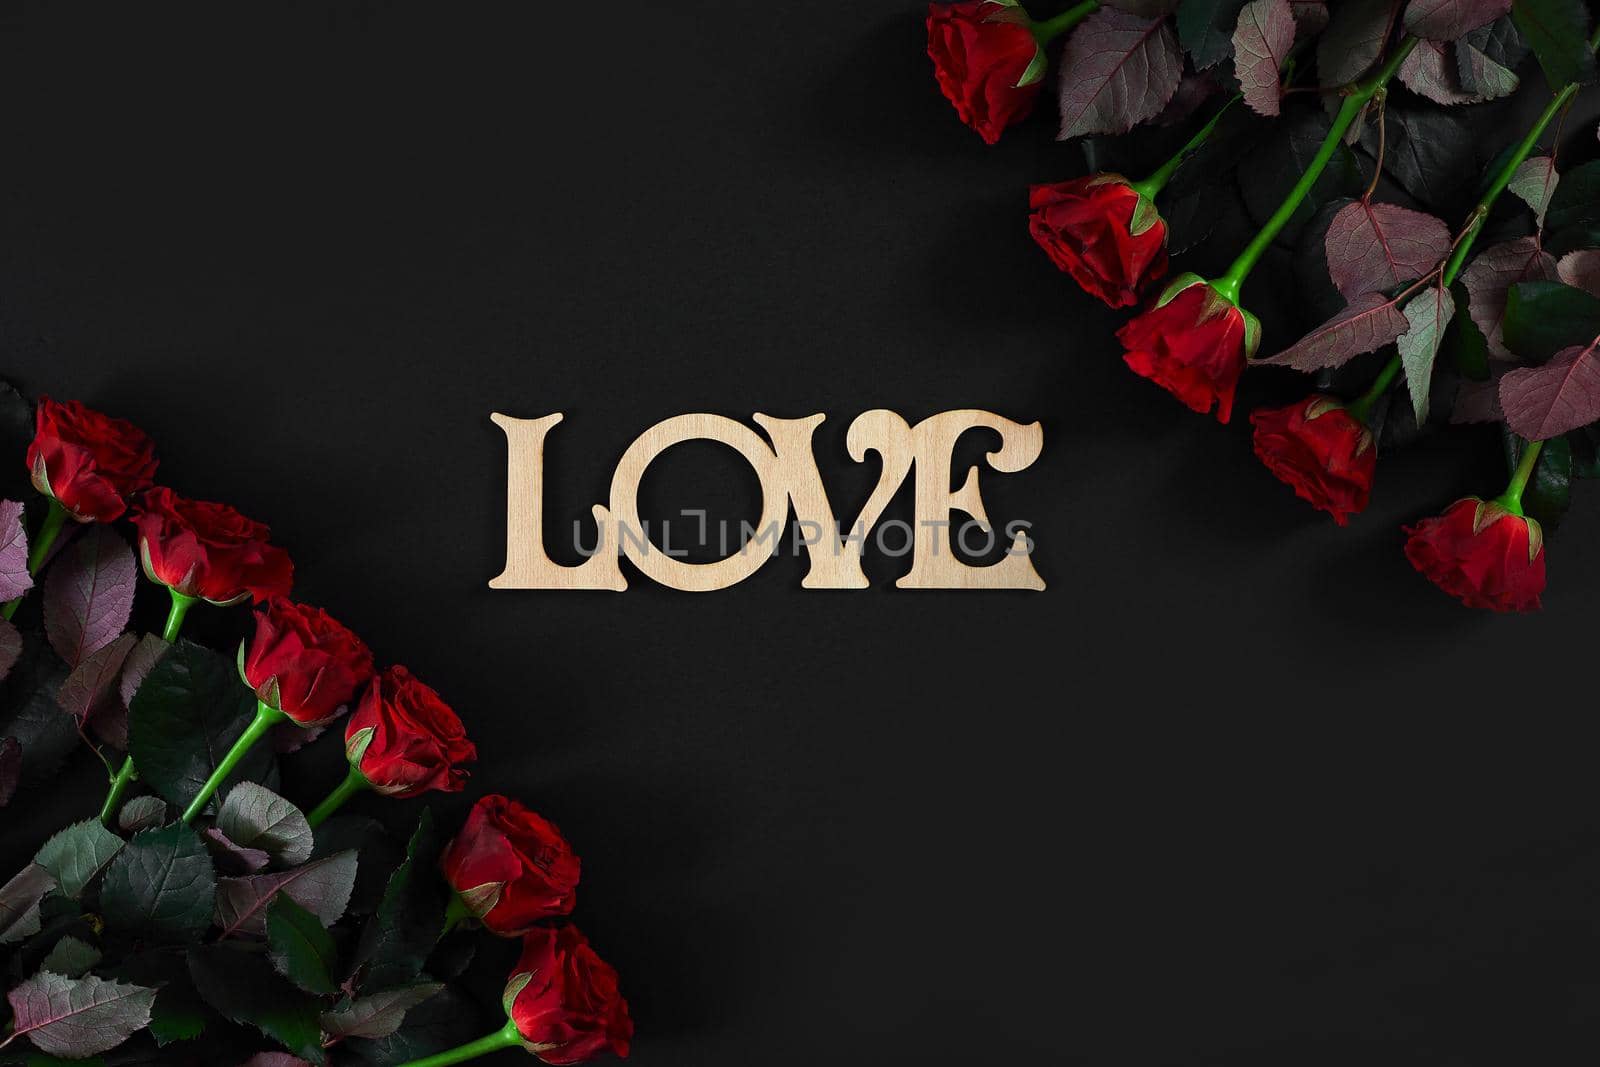 Red roses flowers with wooden word LOVE on black background with place for text. Romantic Valentines holidays concept. Valentine's day greeting card.. Copy space. Still life. Flat lay